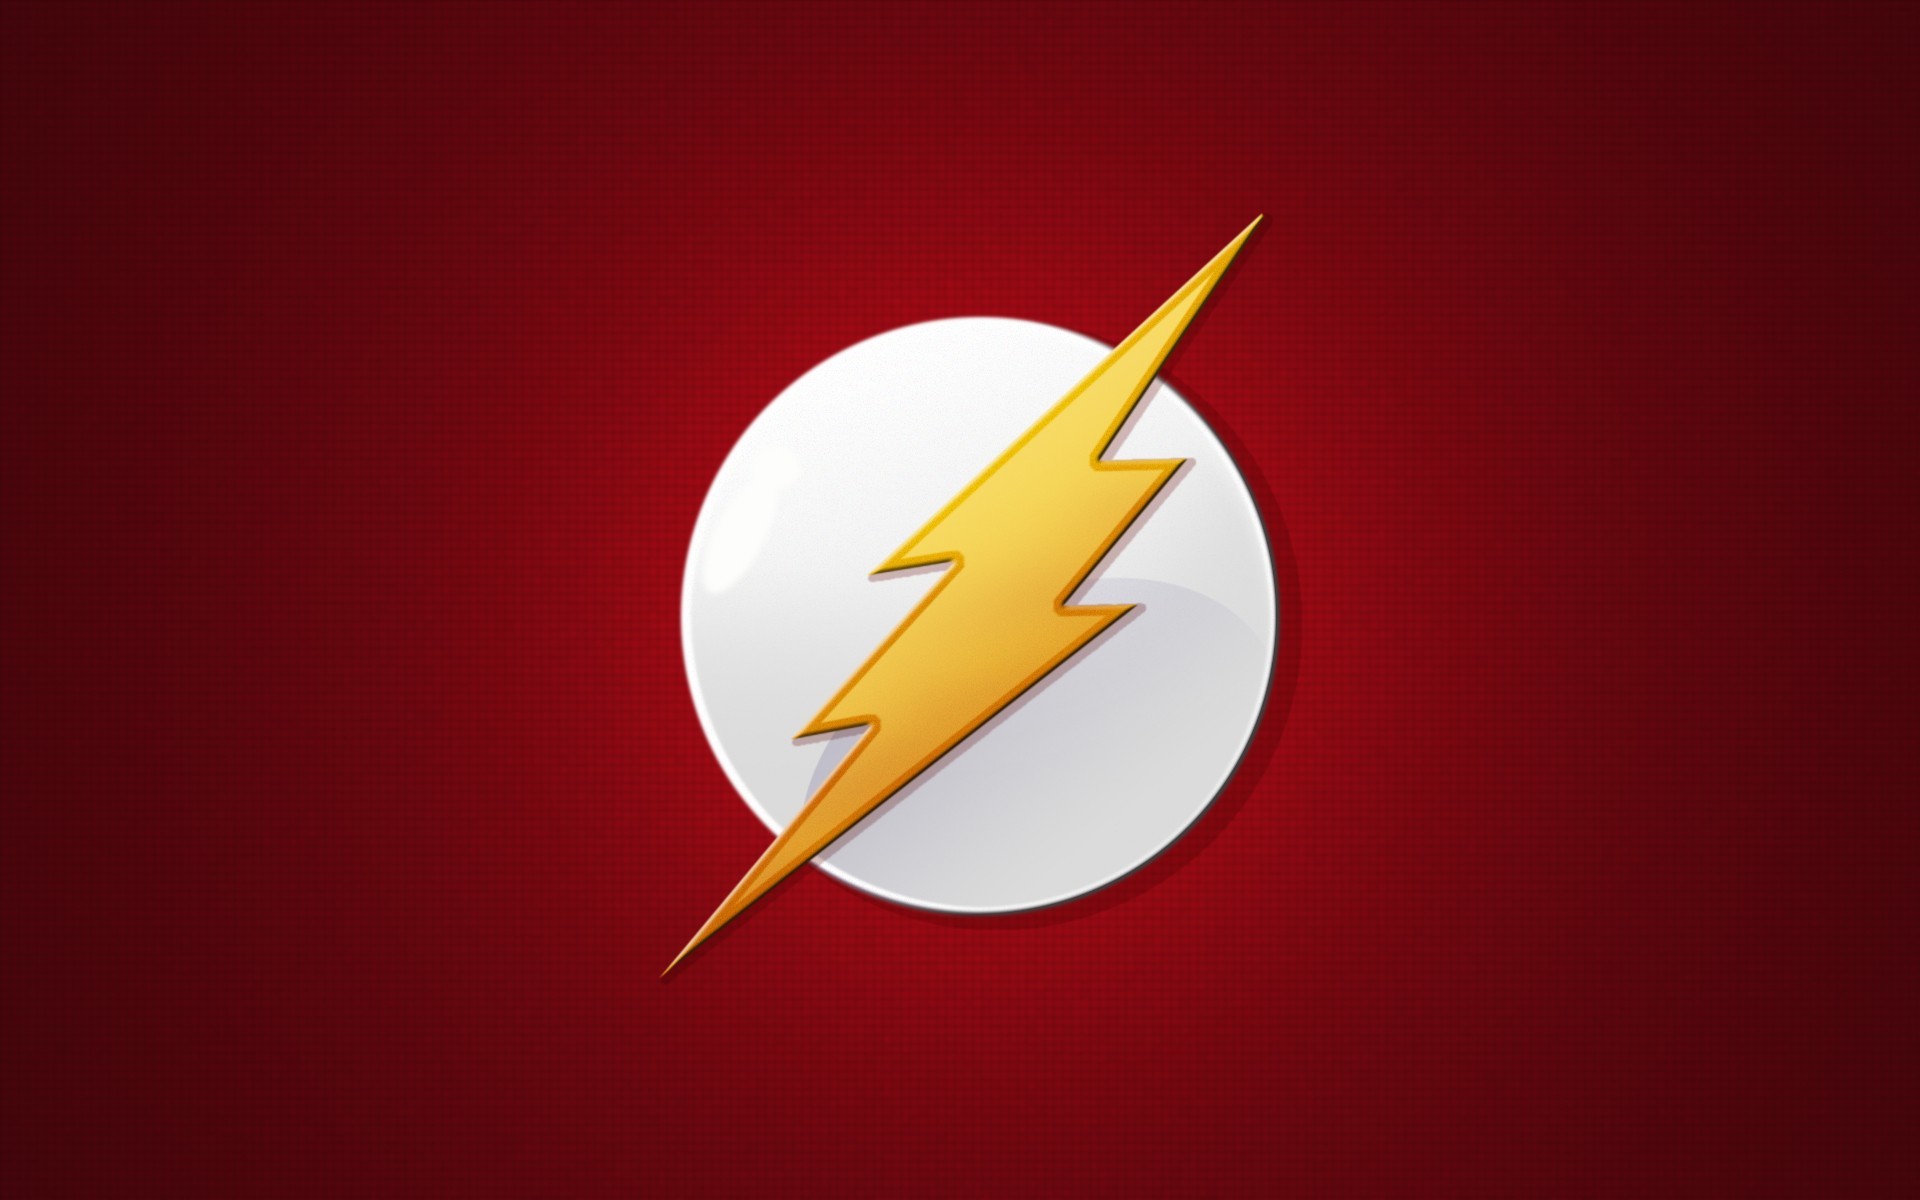 How to Draw the Flash Logo in 7 Steps (with Video Tutorial)